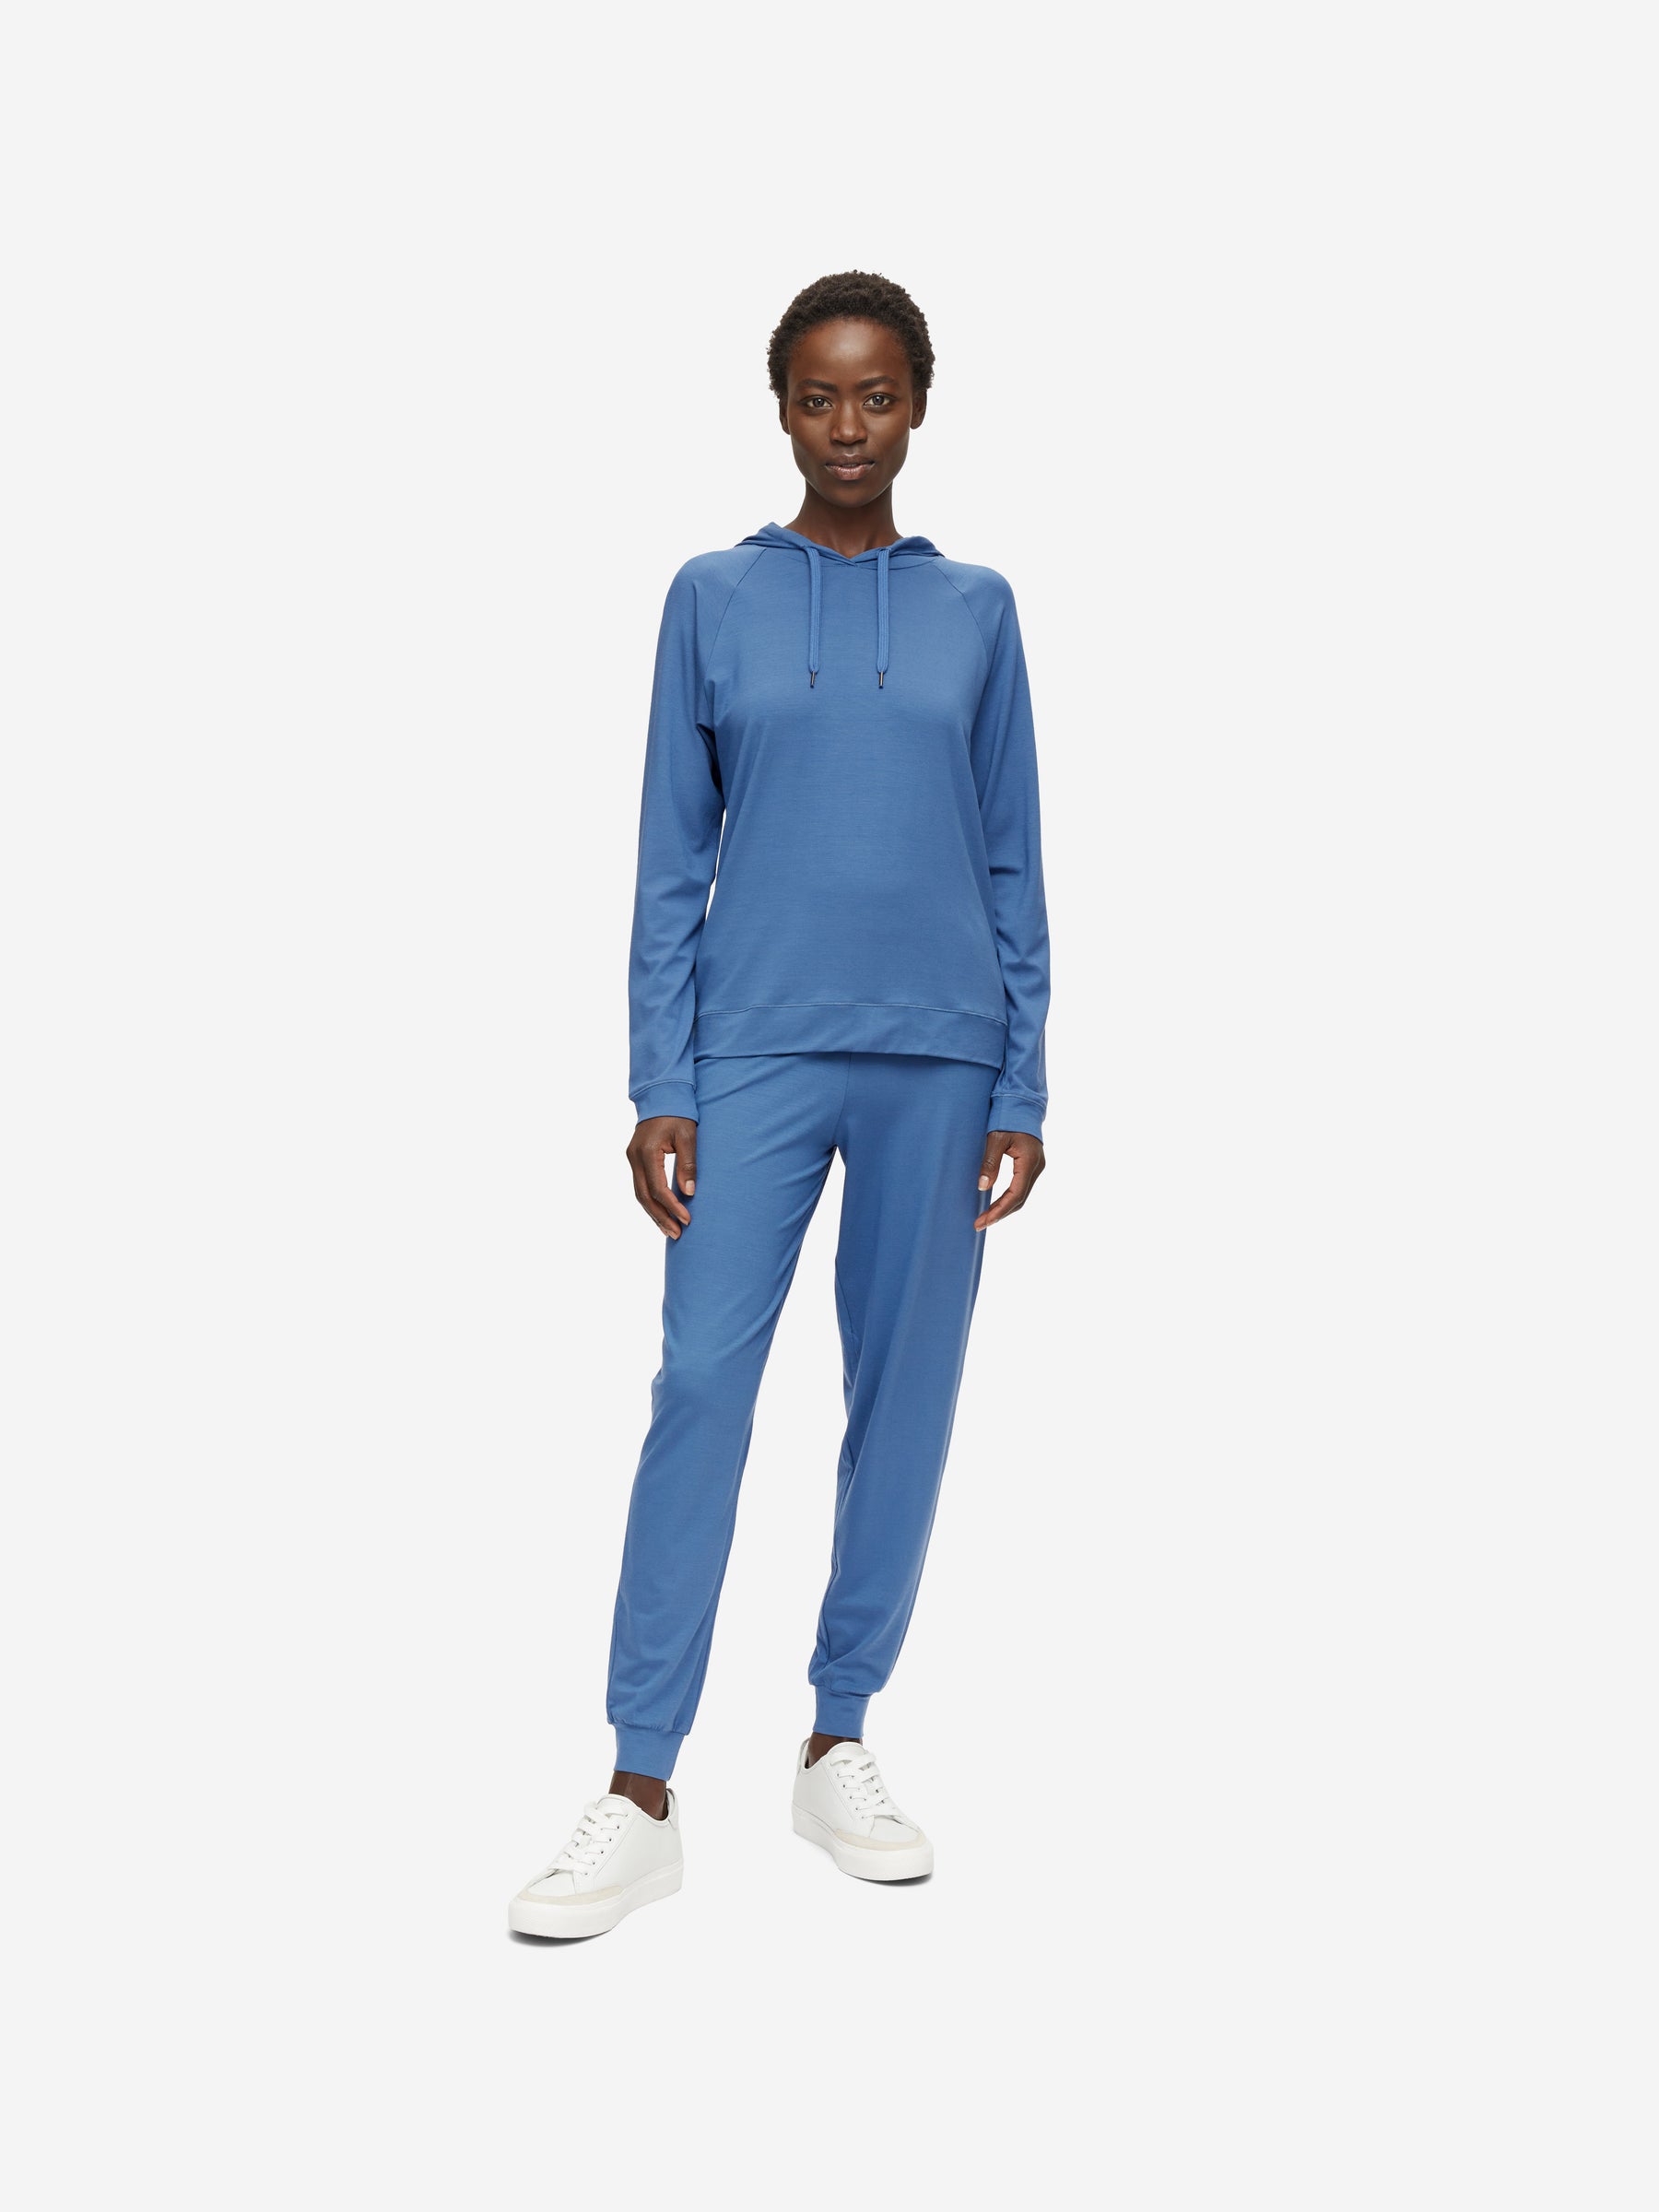 Women's Pullover Hoodie Basel Micro Modal Stretch Storm Blue